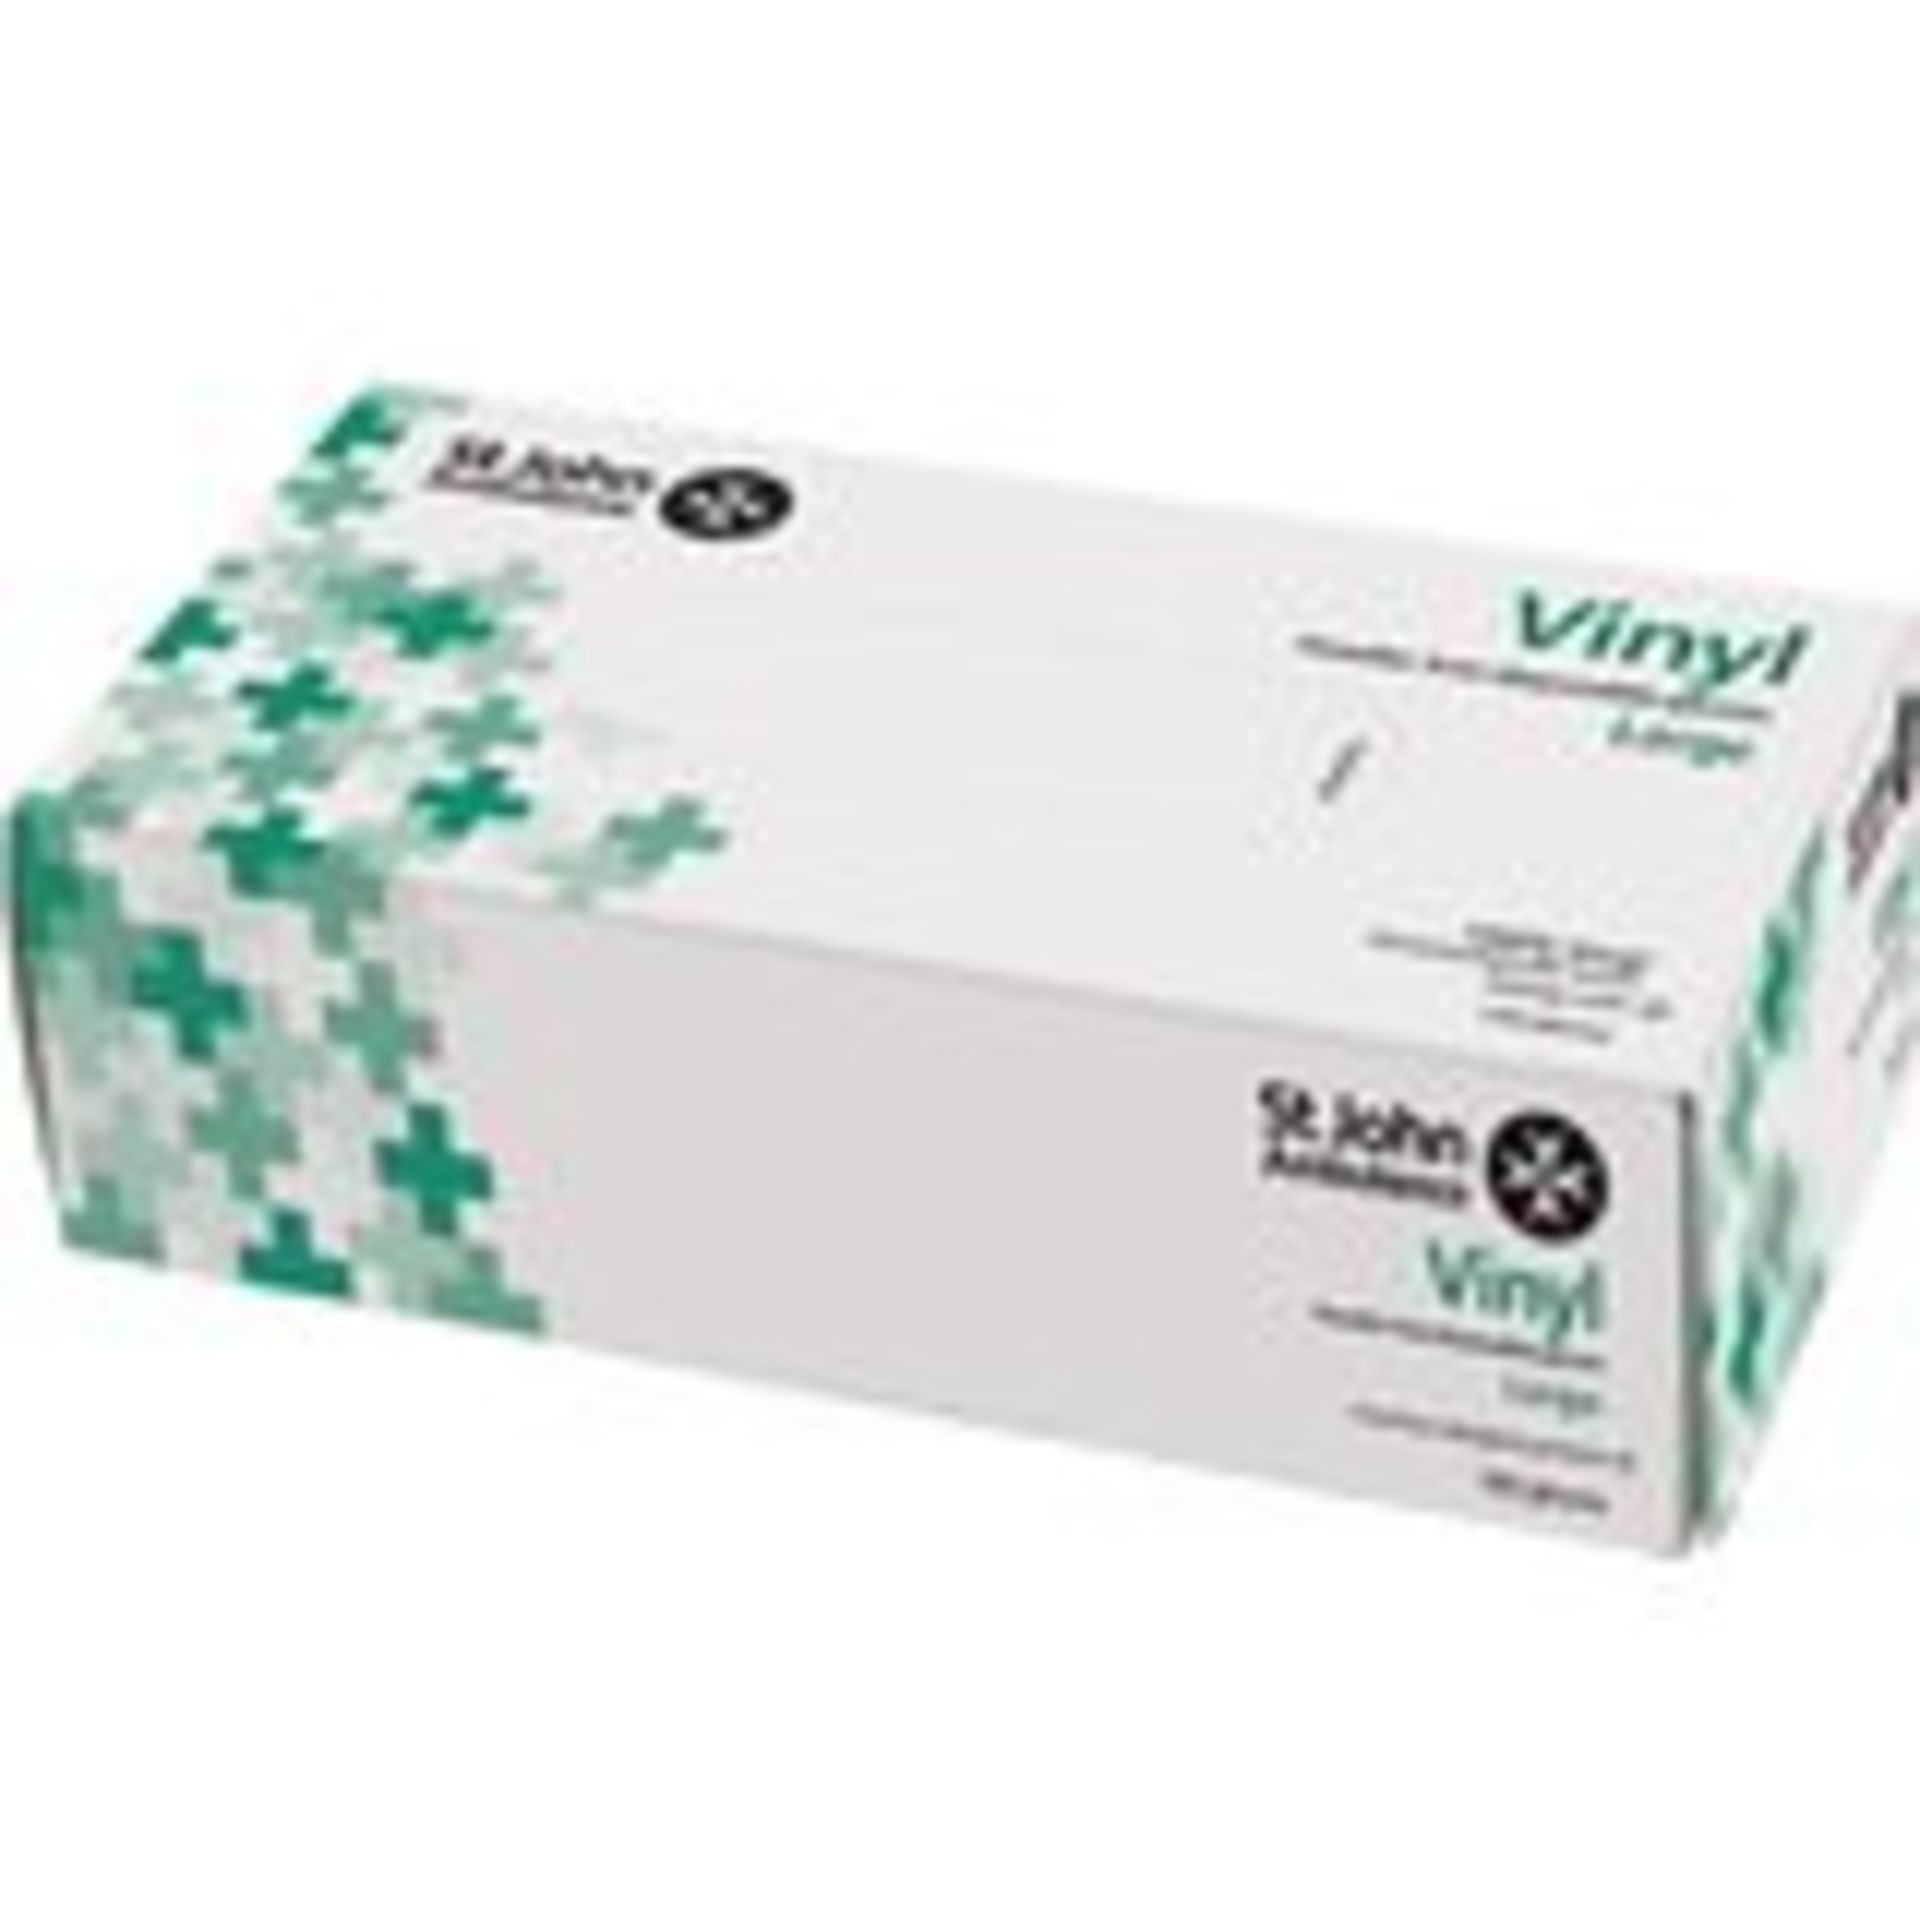 WELLBEING & HEALTH PRODUCTS - 1 Box of 18 units - Latest AMZ price £440 - Image 5 of 12